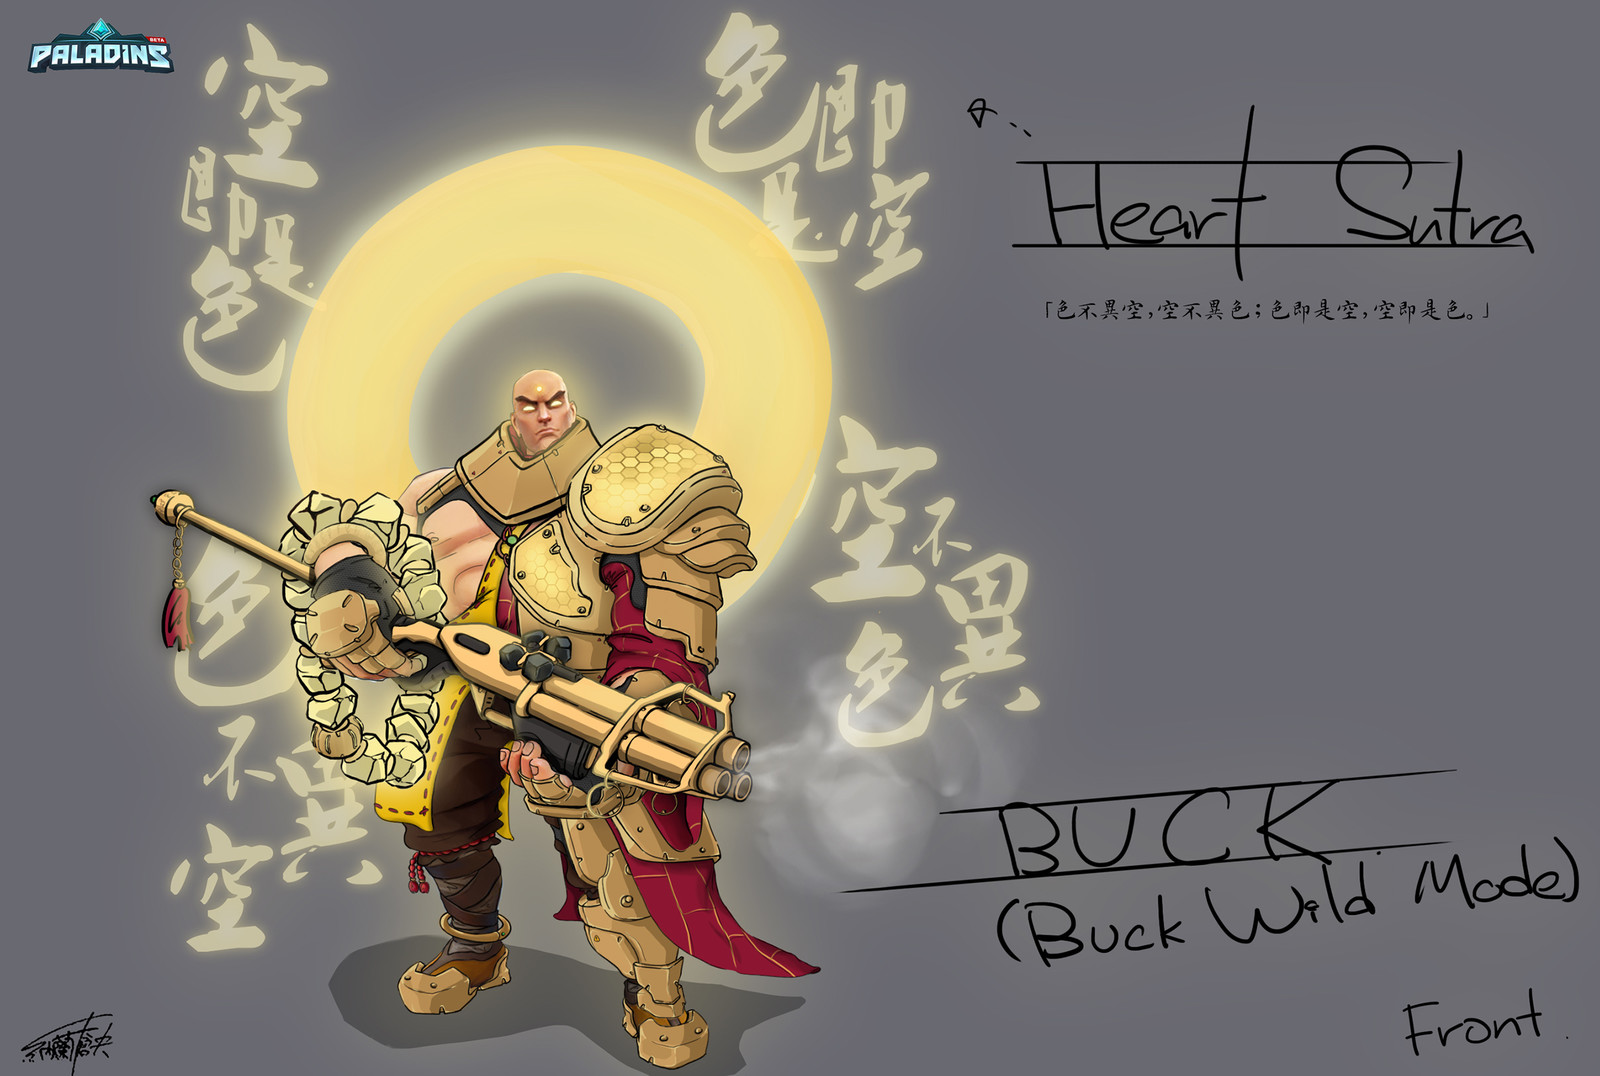 Paladins: Champions of the Real_Buck Abbot (Buddhism) Skin ConceptArt - Buck Wild Mode